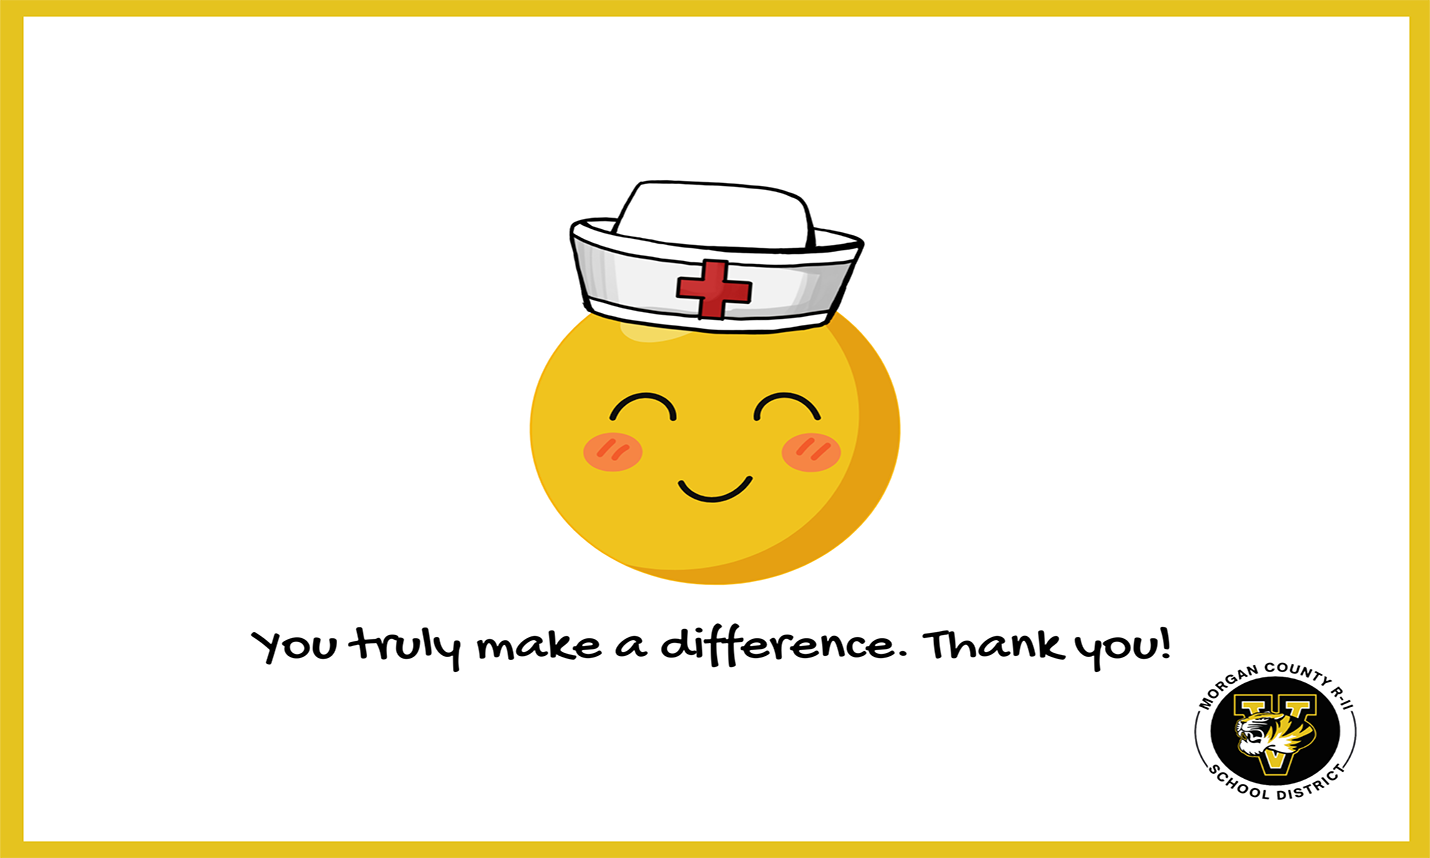 School Nurse - You Truly Make A Difference. Thank You!